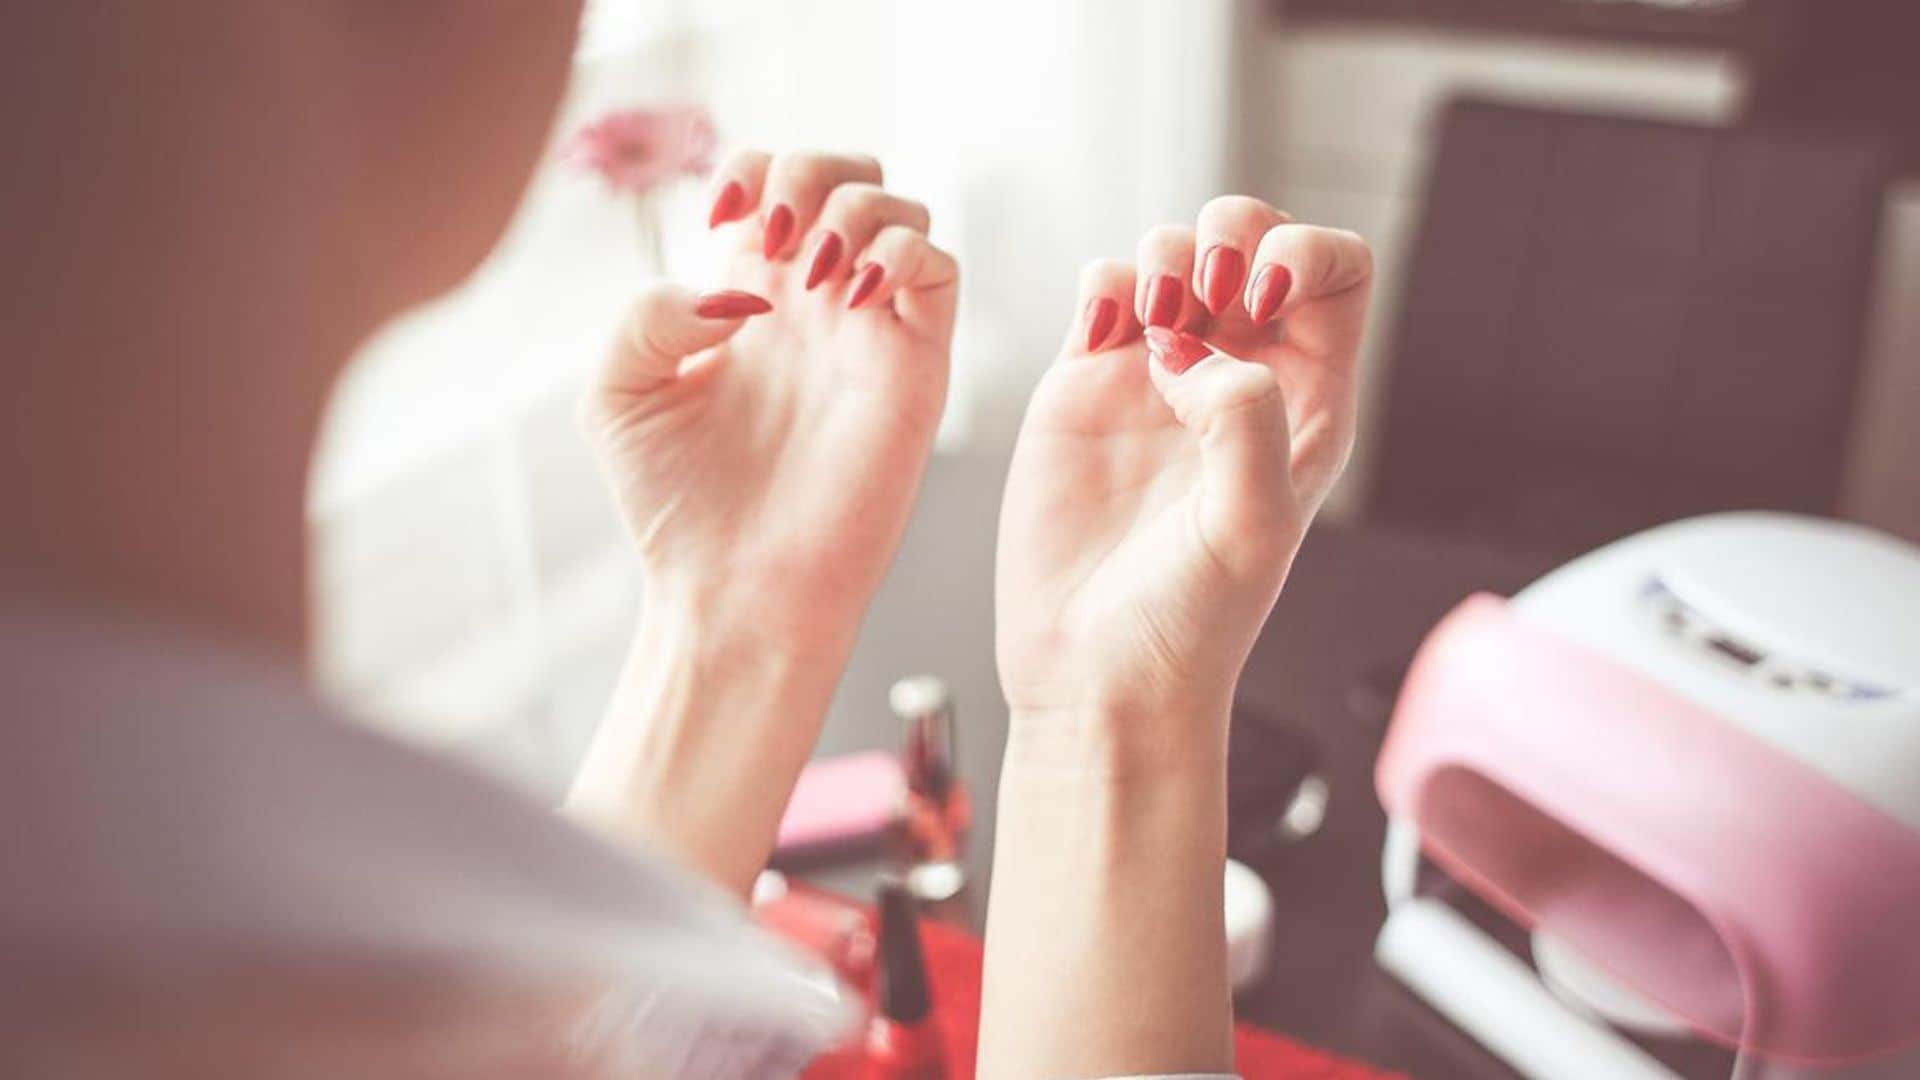 How to remove gel nail polish at home according to the experts